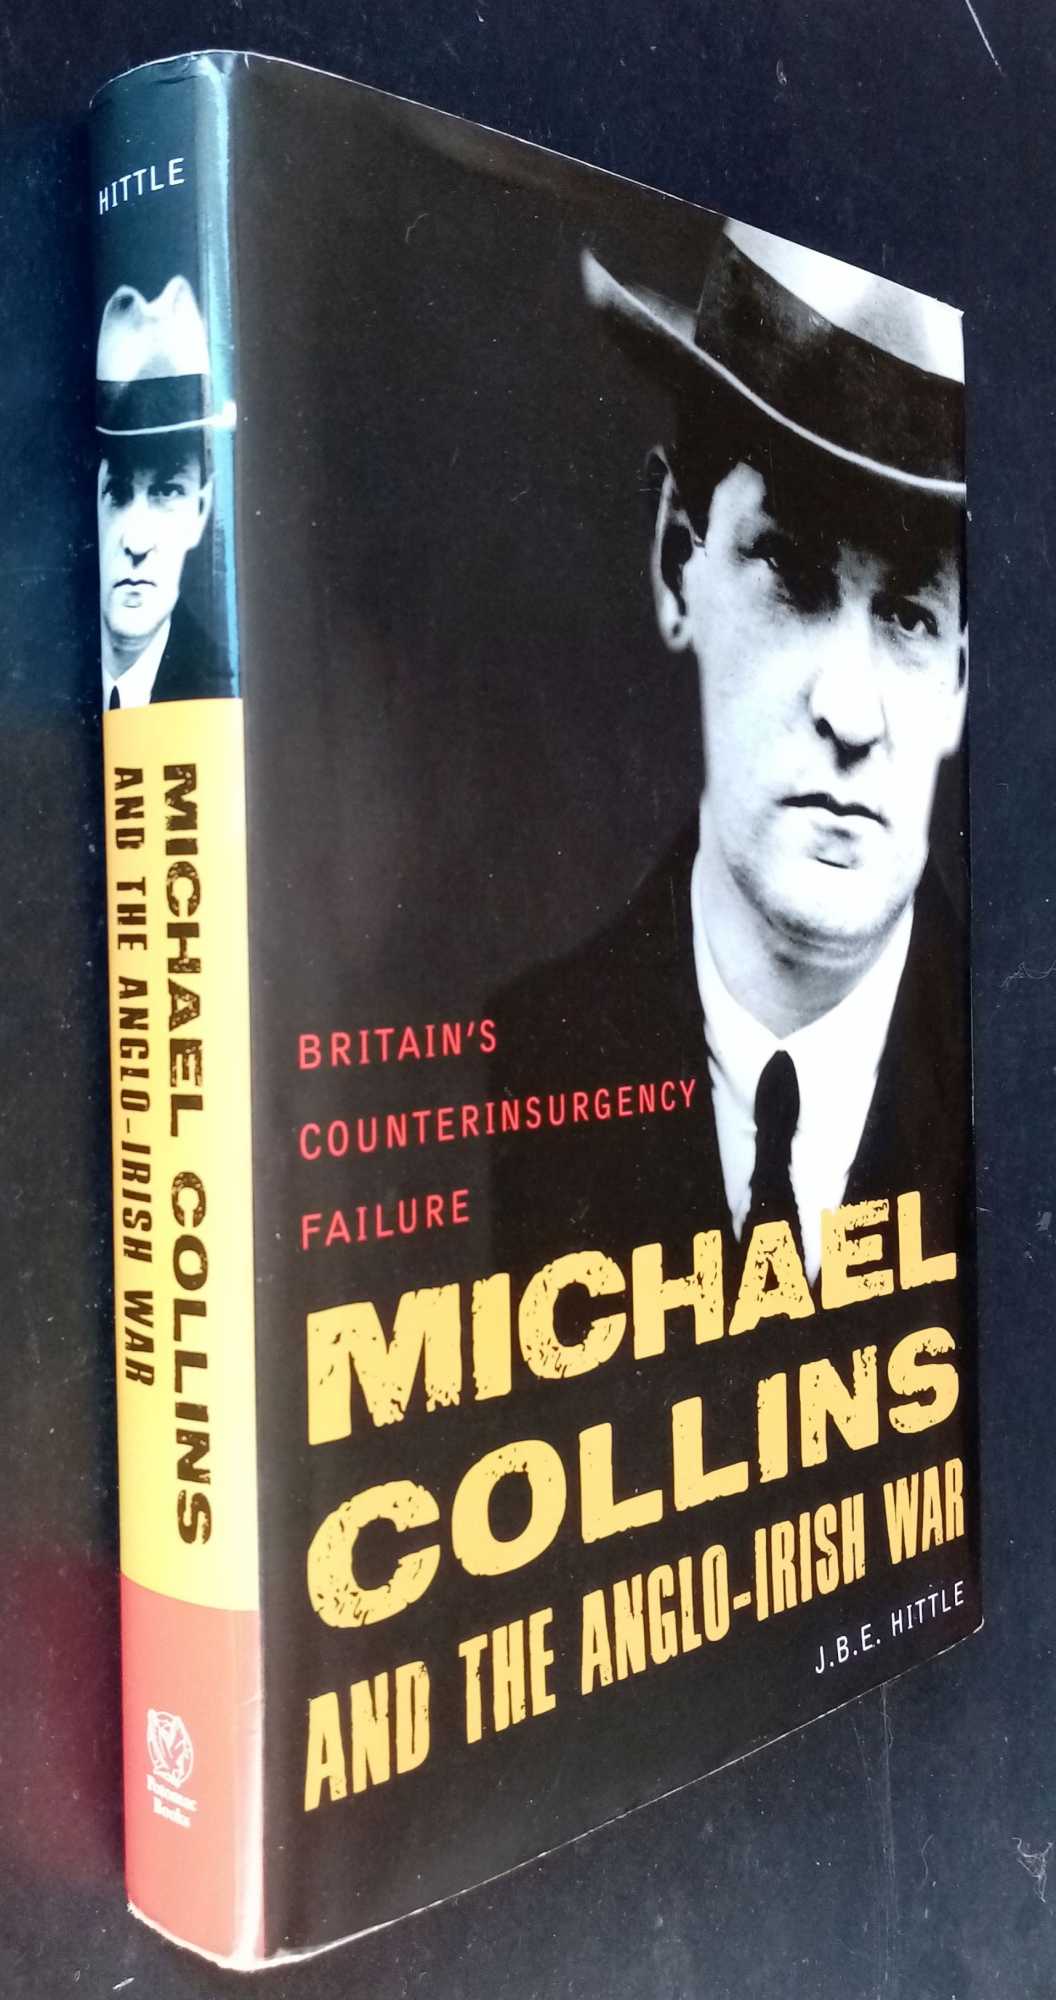 JB Hittle - Michael Collins And The Anglo-Irish War: Britain's Counterinsurgency Failure